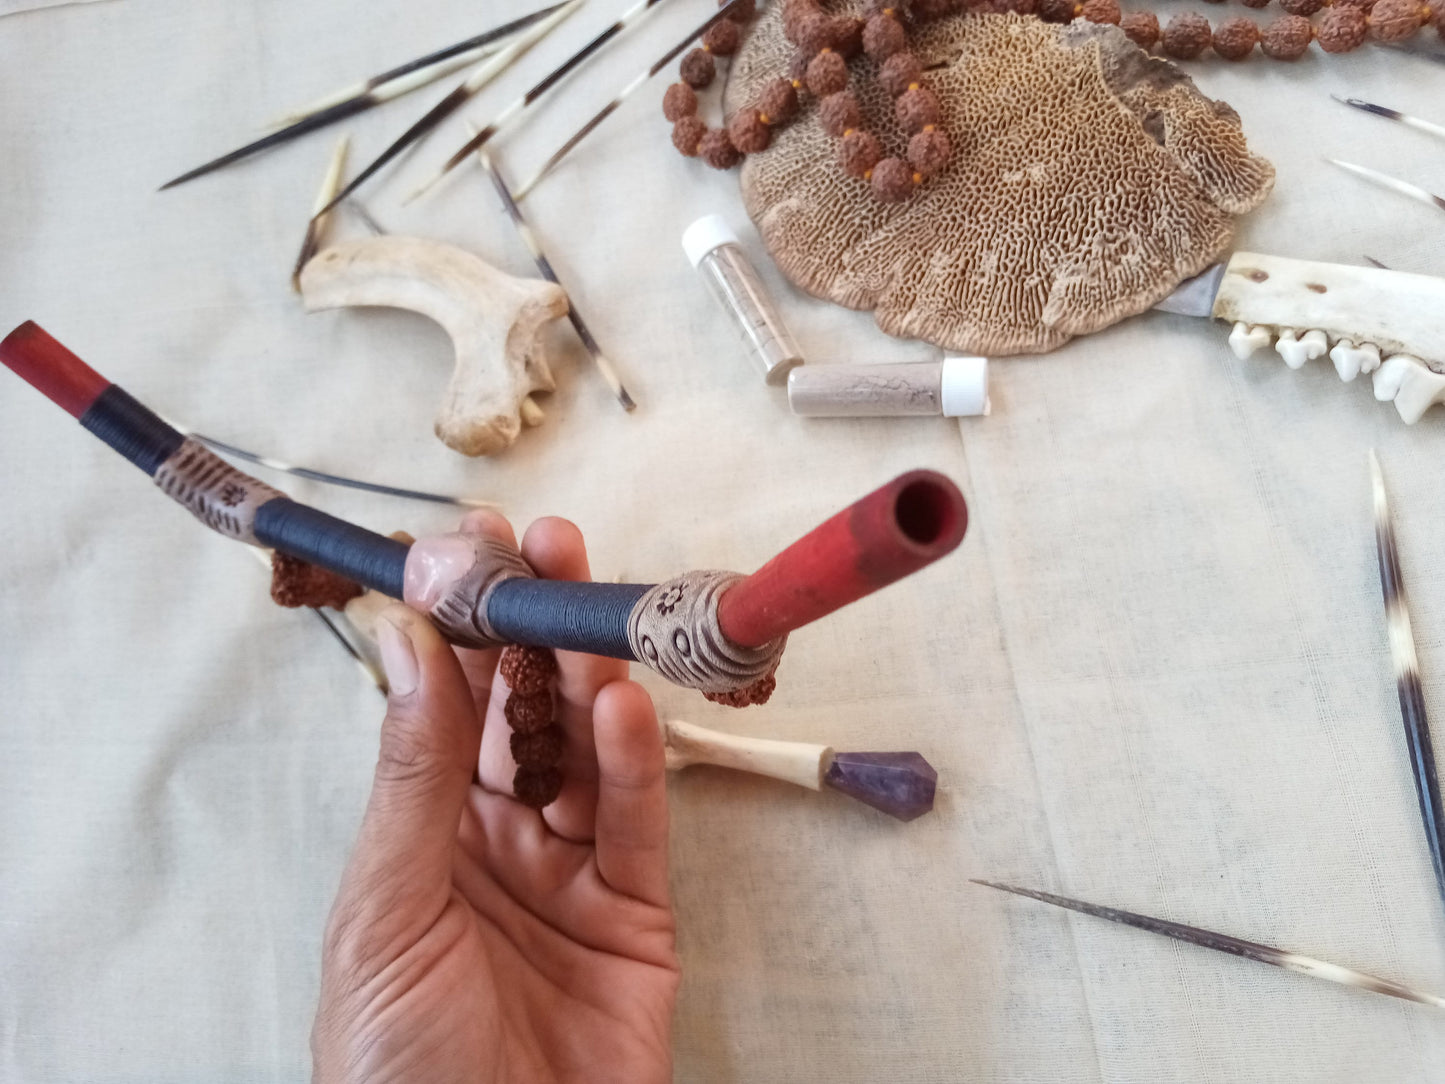 Tepi Rapè applicator - Traditionally used in Ayahuasca or Kambo ceremonies - handmade bamboo pipe with rose quartz gem and shiva rudrakshs